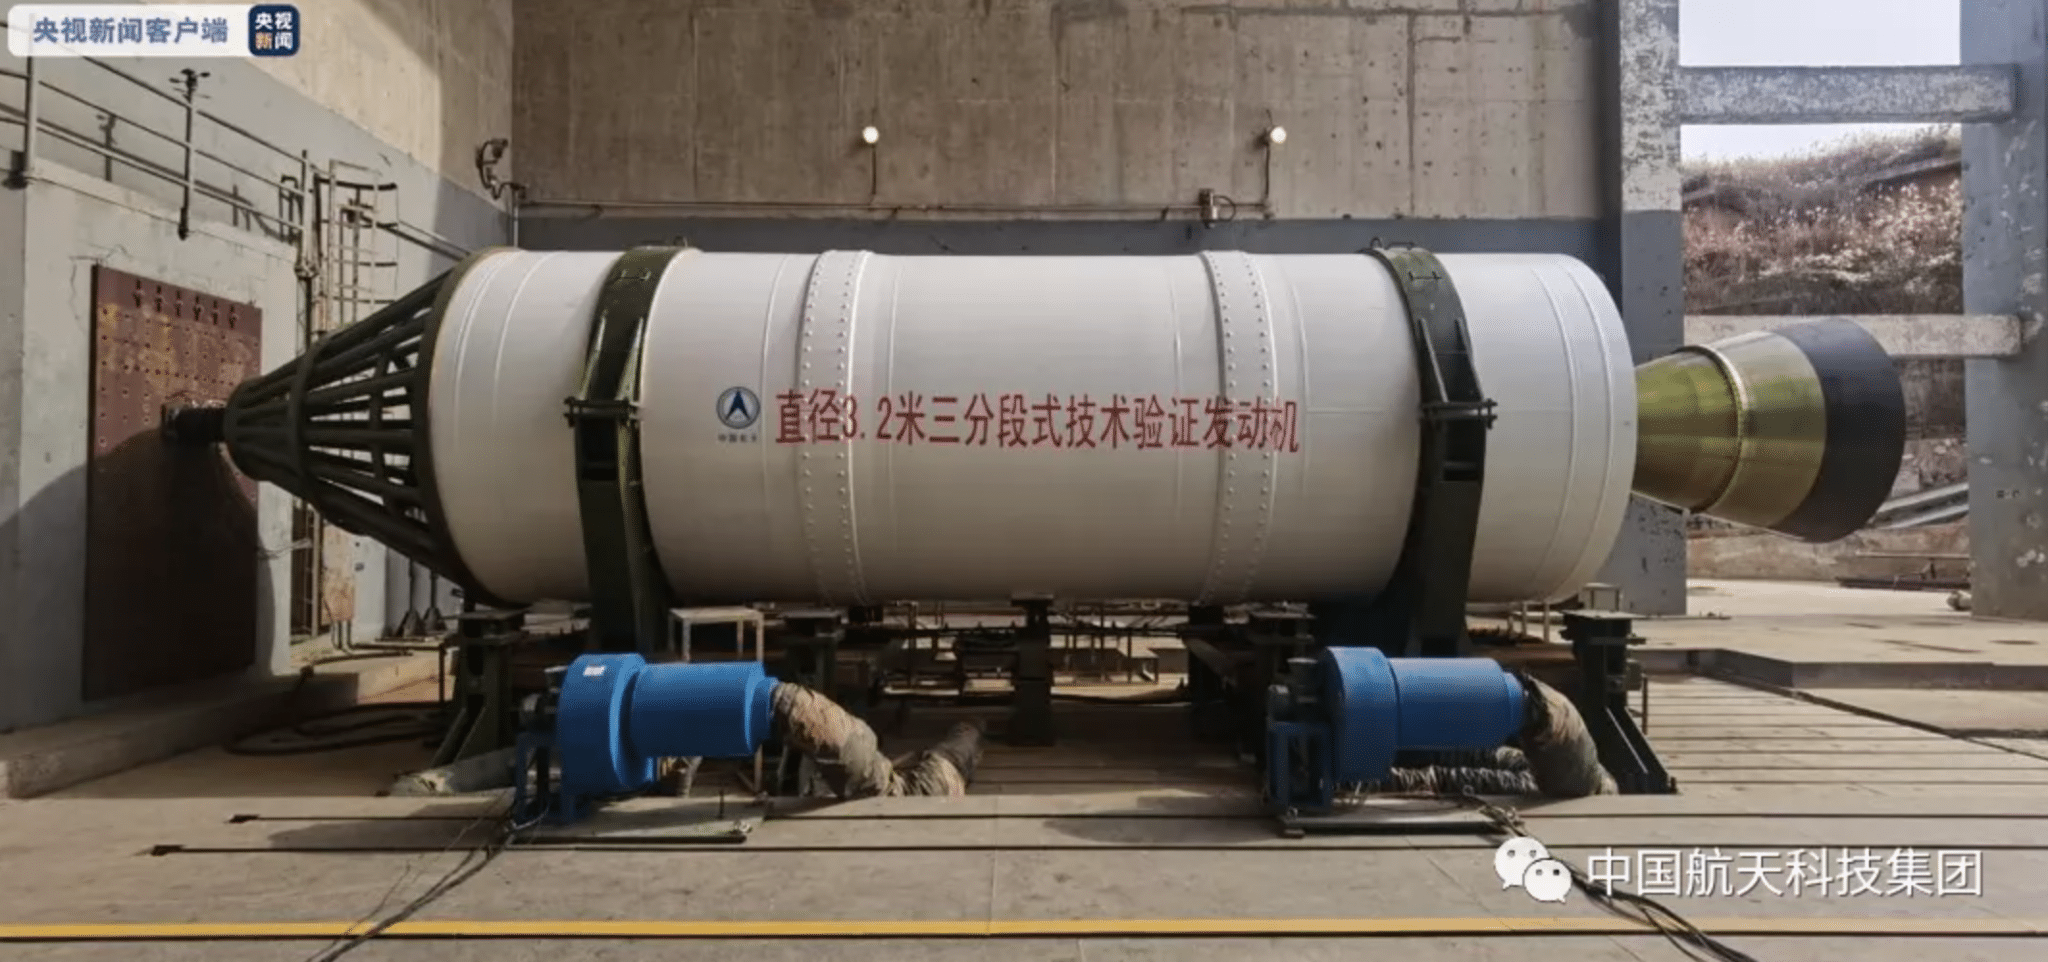 New Chinese solid rocket